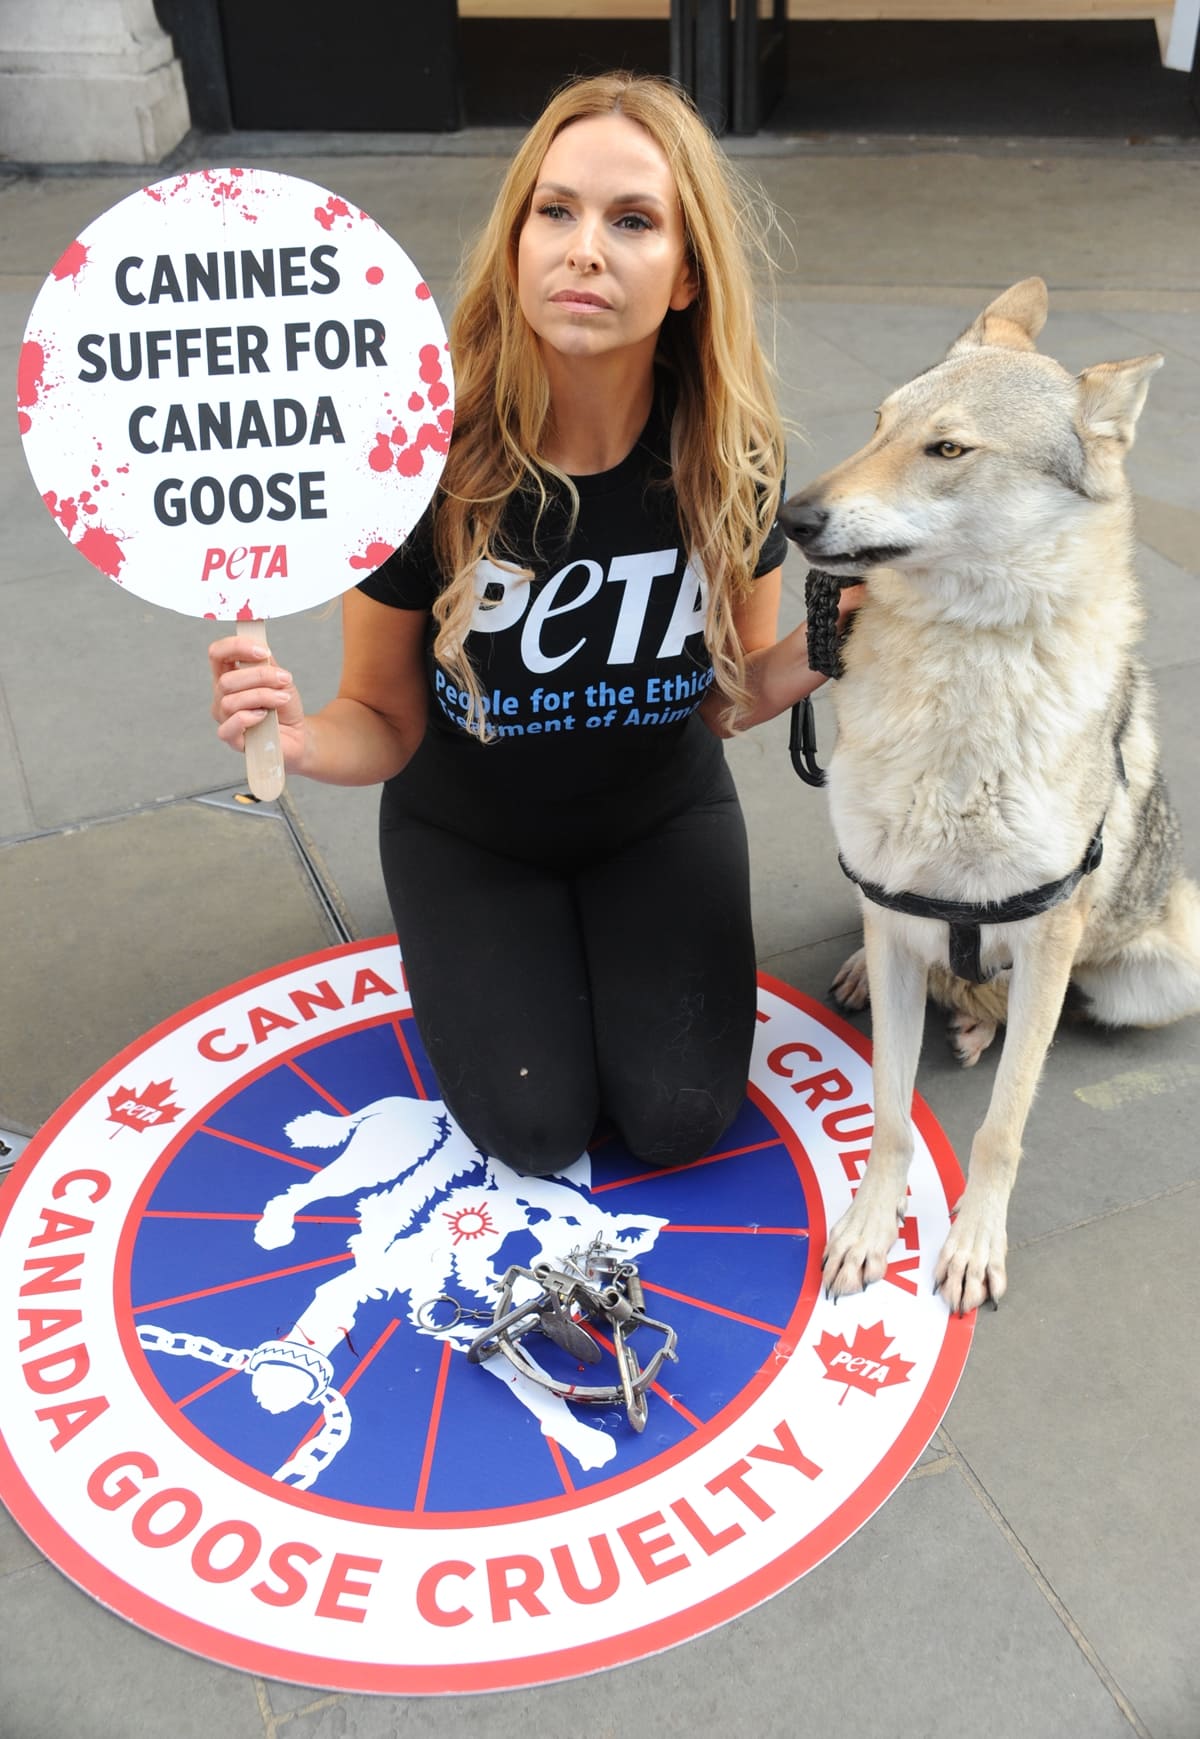 UK TV presenter and animal expert Anneka Svenska and her canine companion Will join the PETA campaign to end trapping and killing of coyotes for fur-trimmed coats, protesting outside the Canada Goose store on Regent Street, London, on December 8, 2017